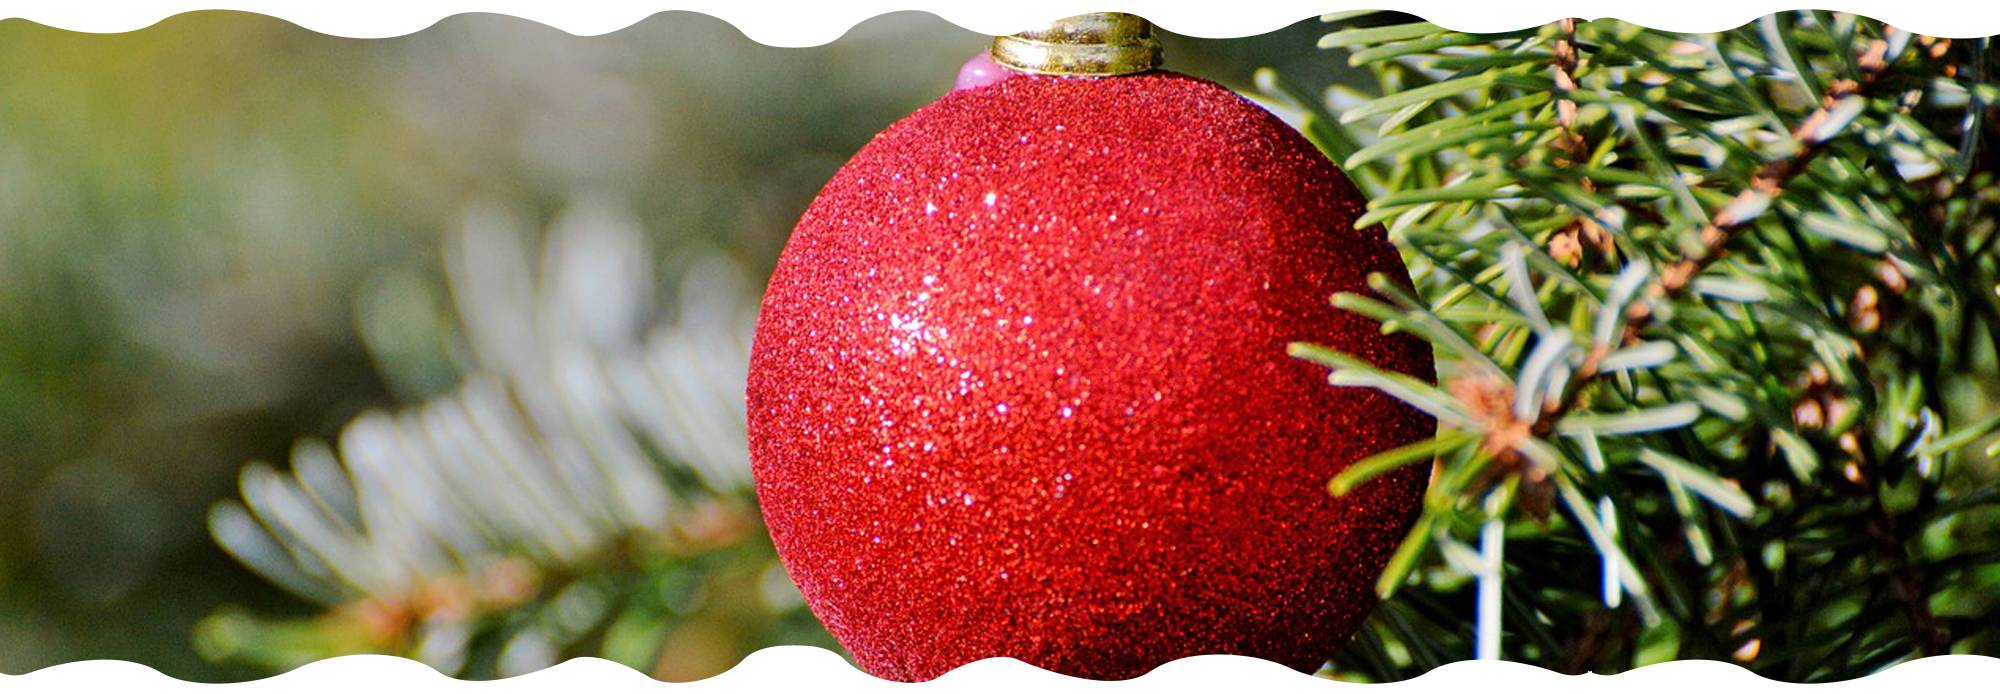 christmas-tree-campaign-gardencenternews-cost